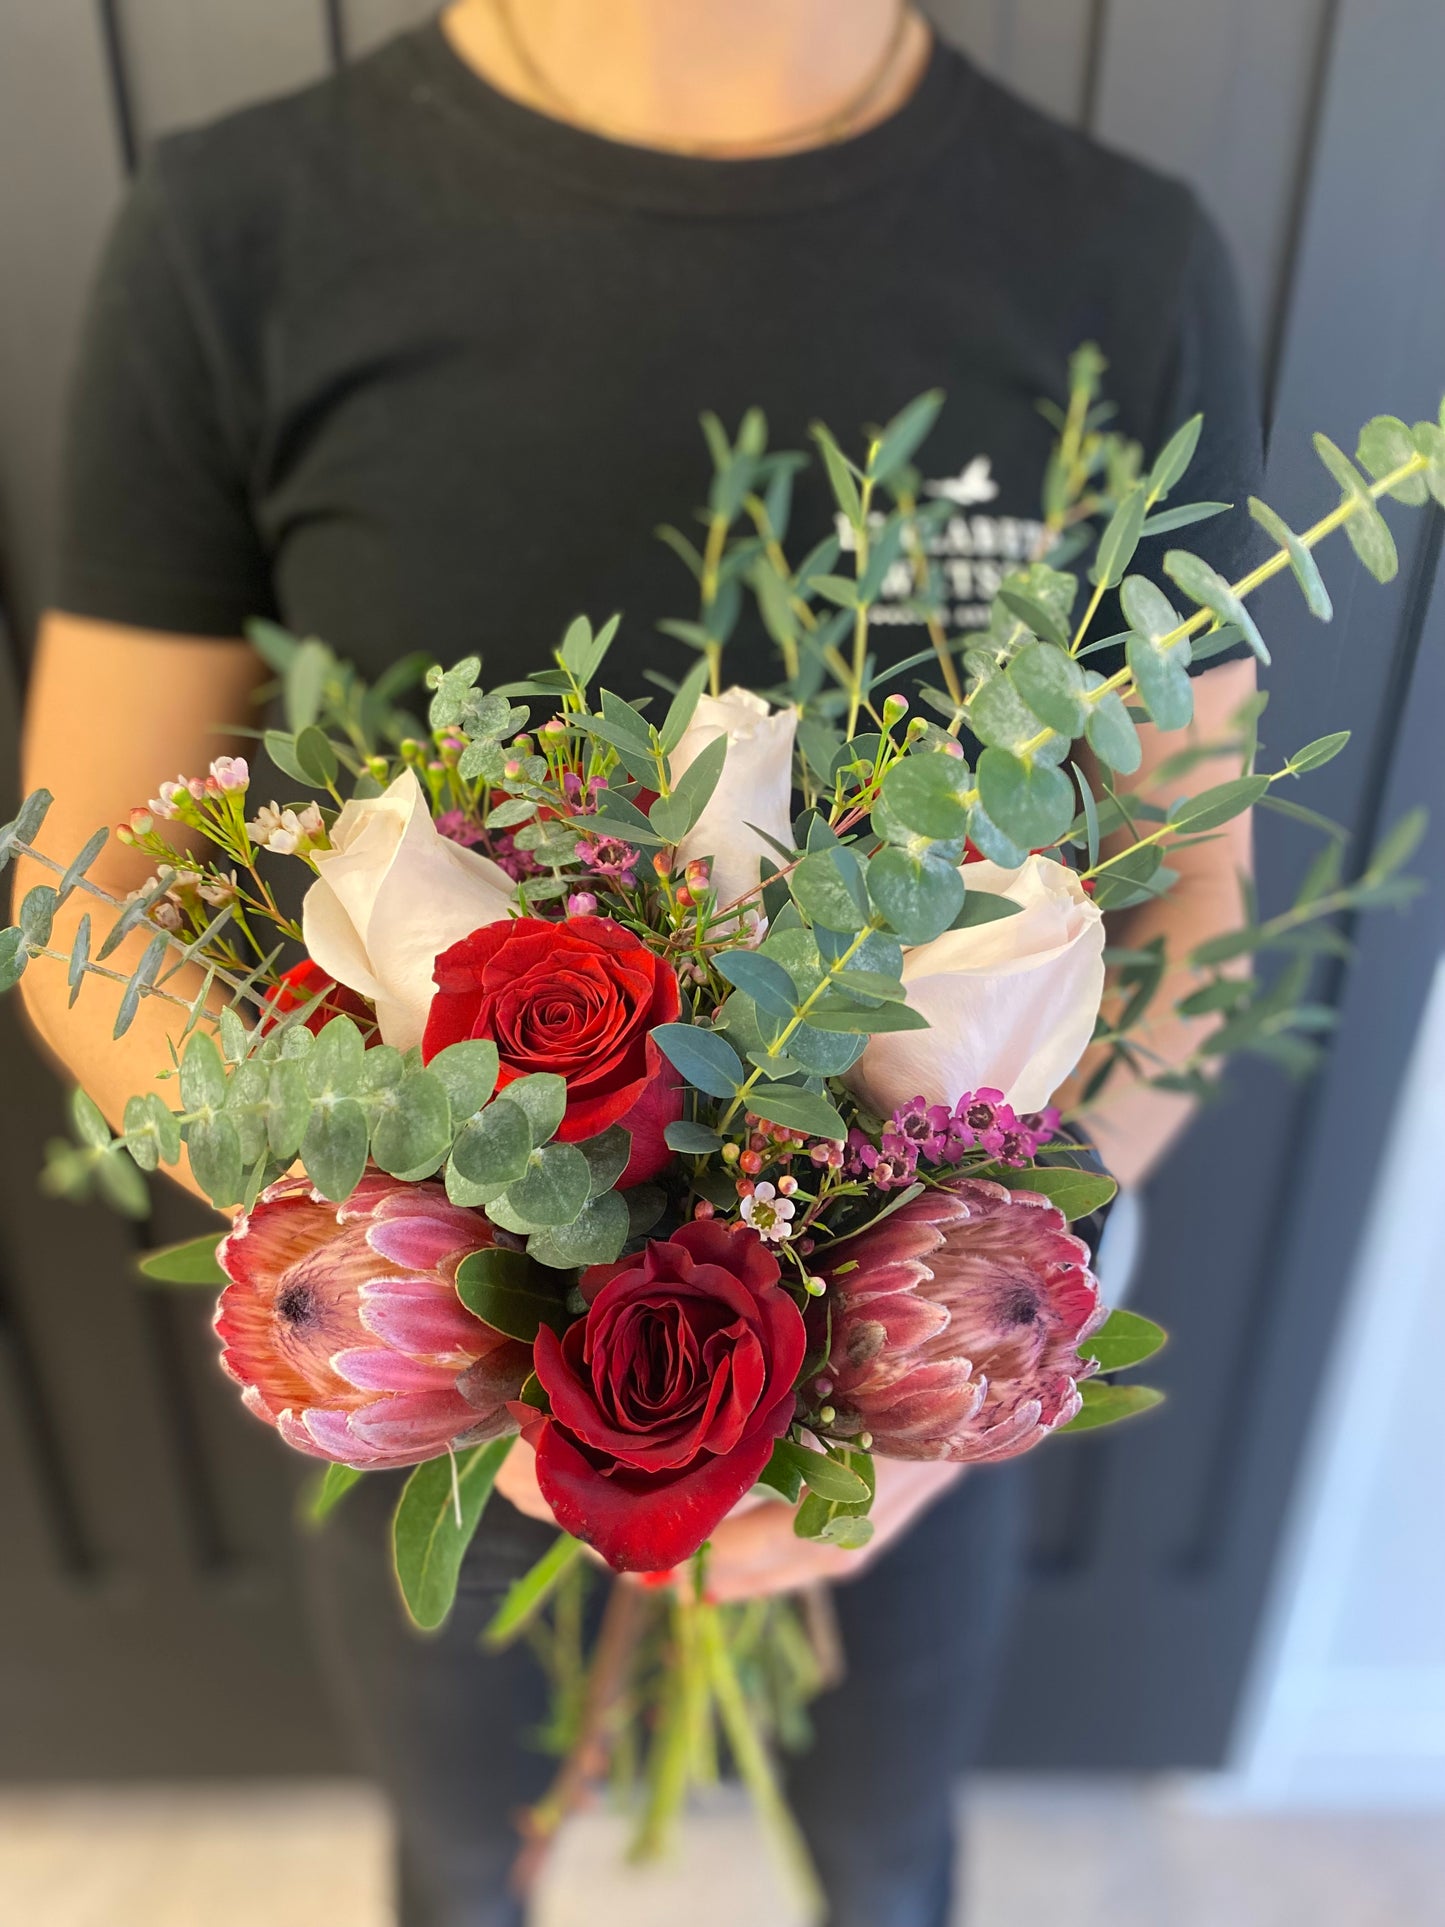 Luxe Bouquet